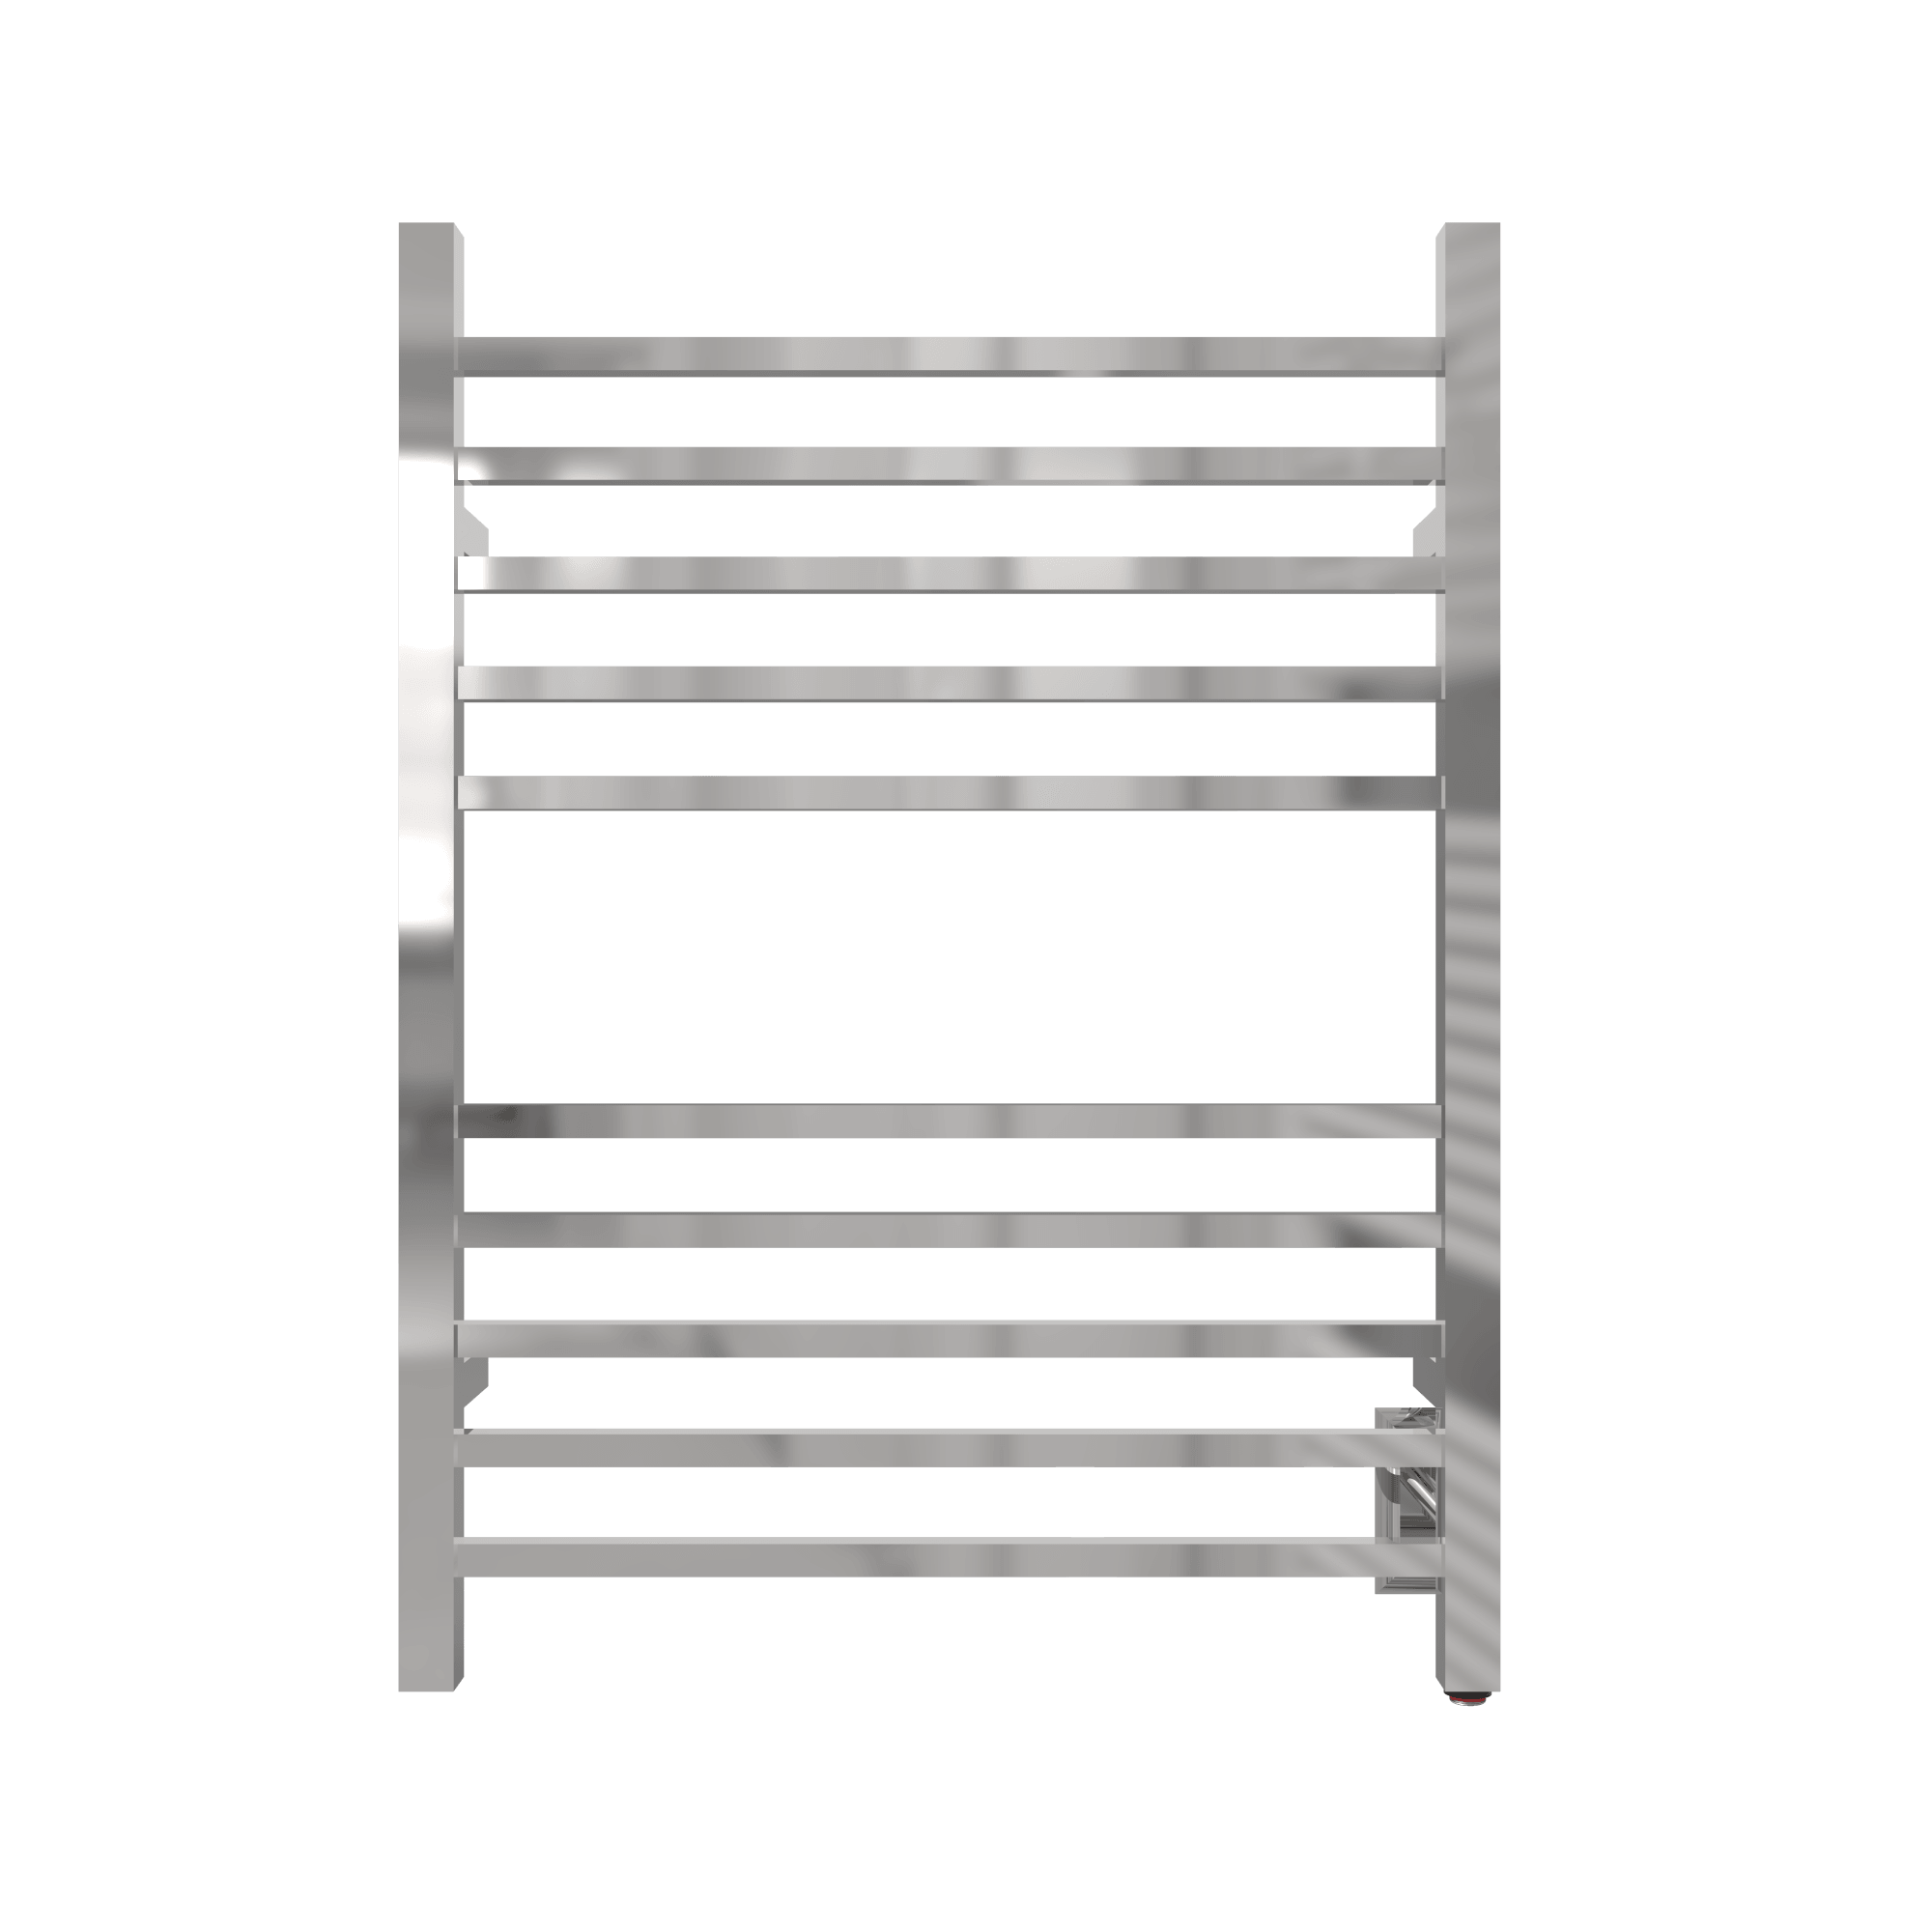 Ortonbath Towel Warmer with Built-in Timer for Bath Hardwired